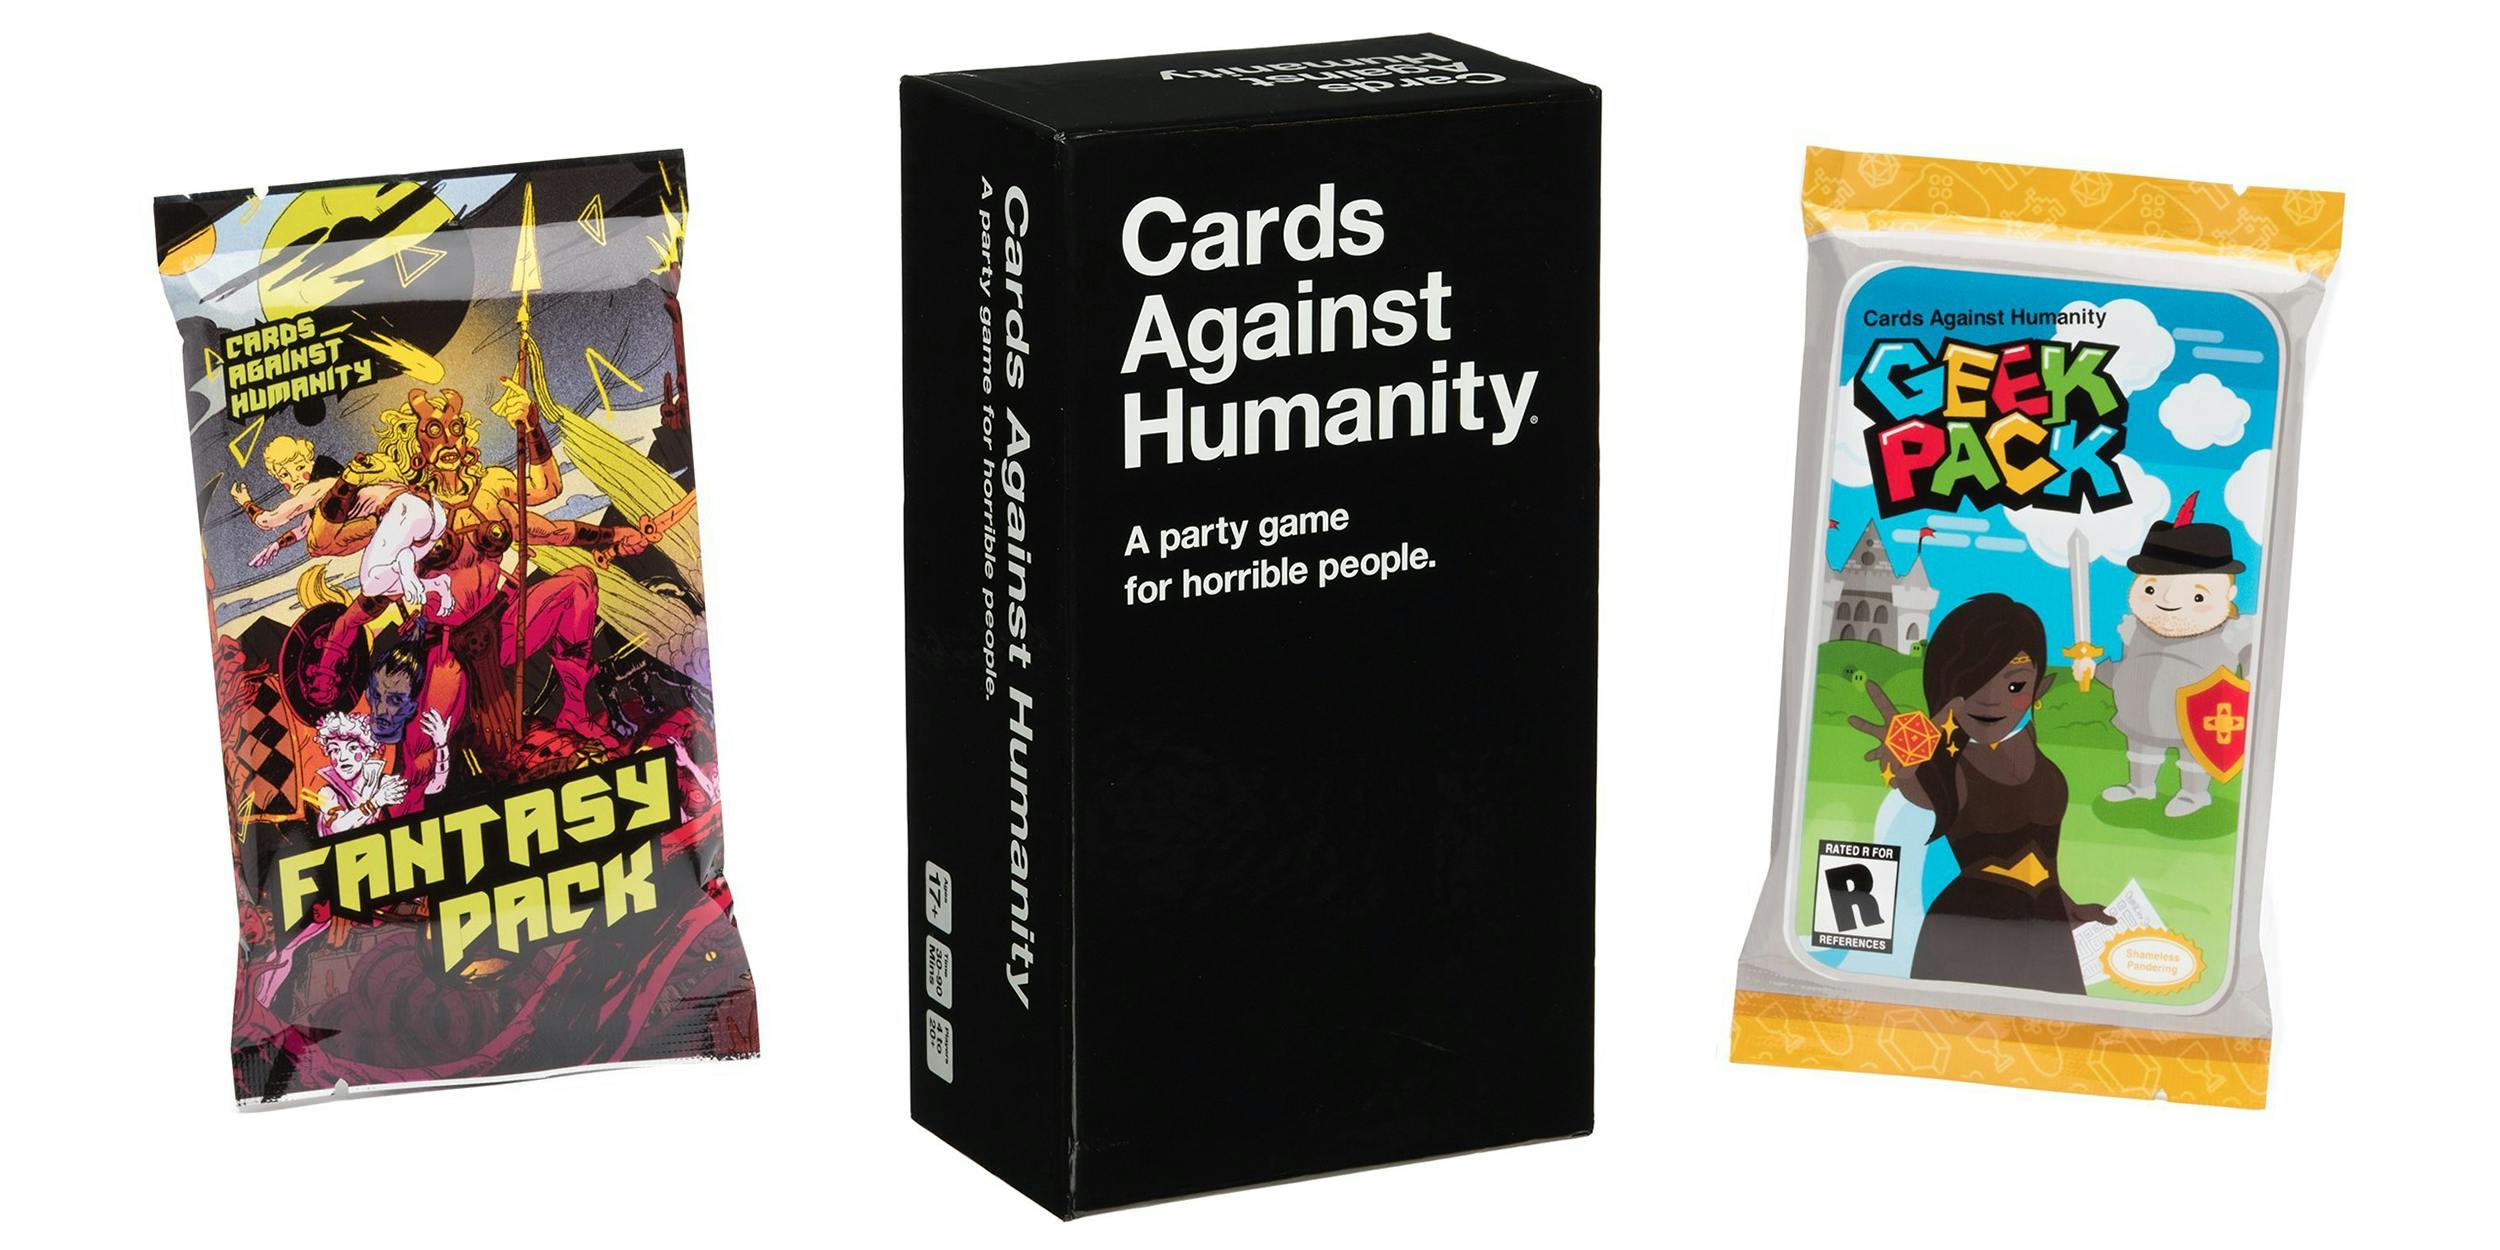 Nerd up your Cards Against Humanity experience with these expansions